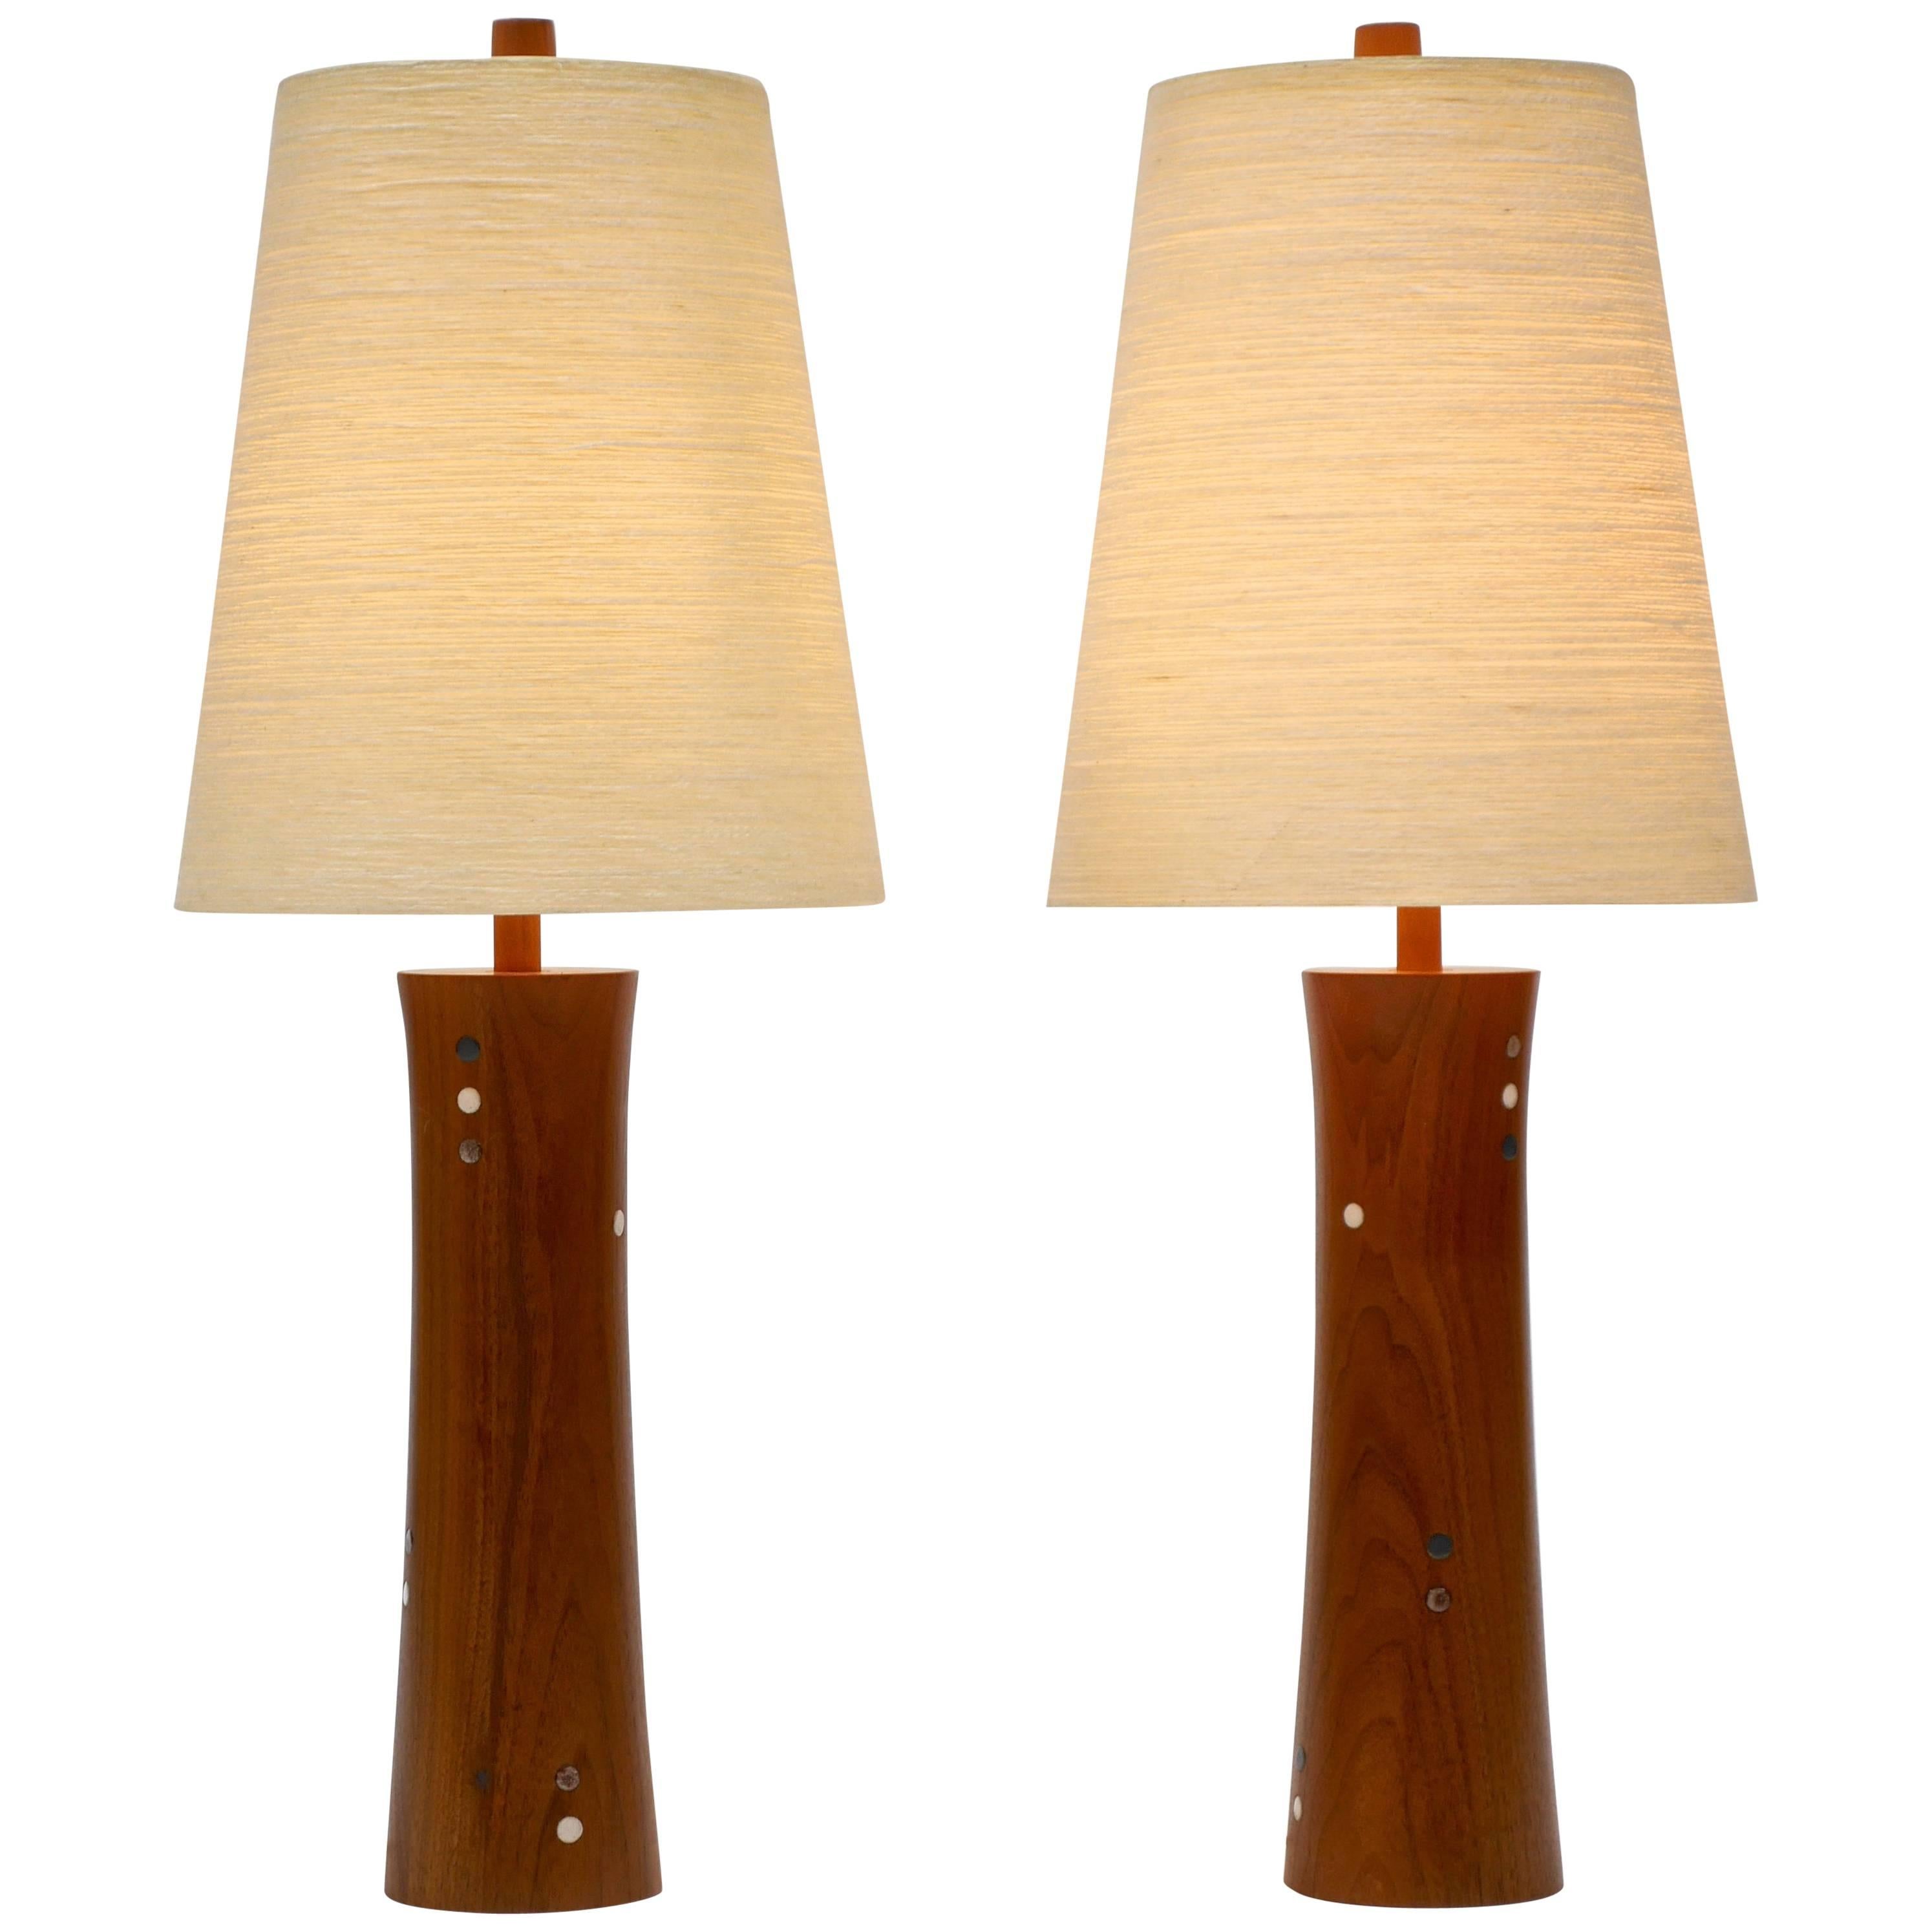 Pair of Turned Walnut and Tile Table Lamps by Gordon and Jane Martz For Sale